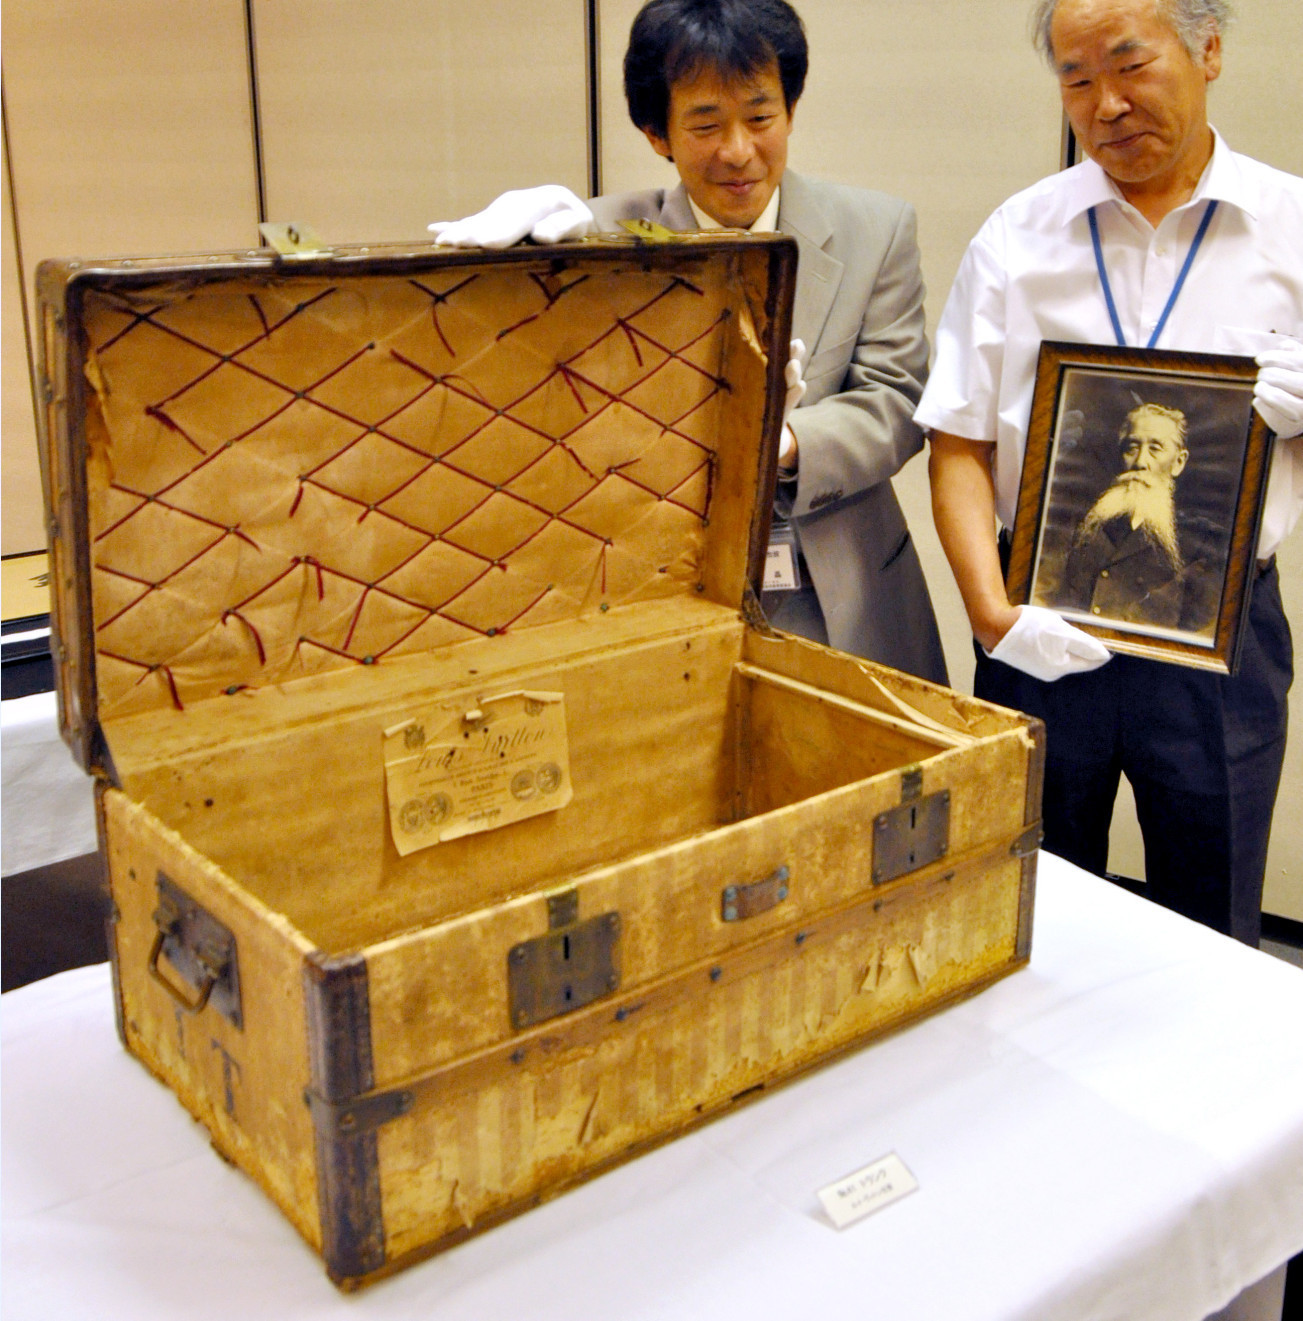 Liberal Party founder Itagaki favored Louis Vuitton goods, 1883